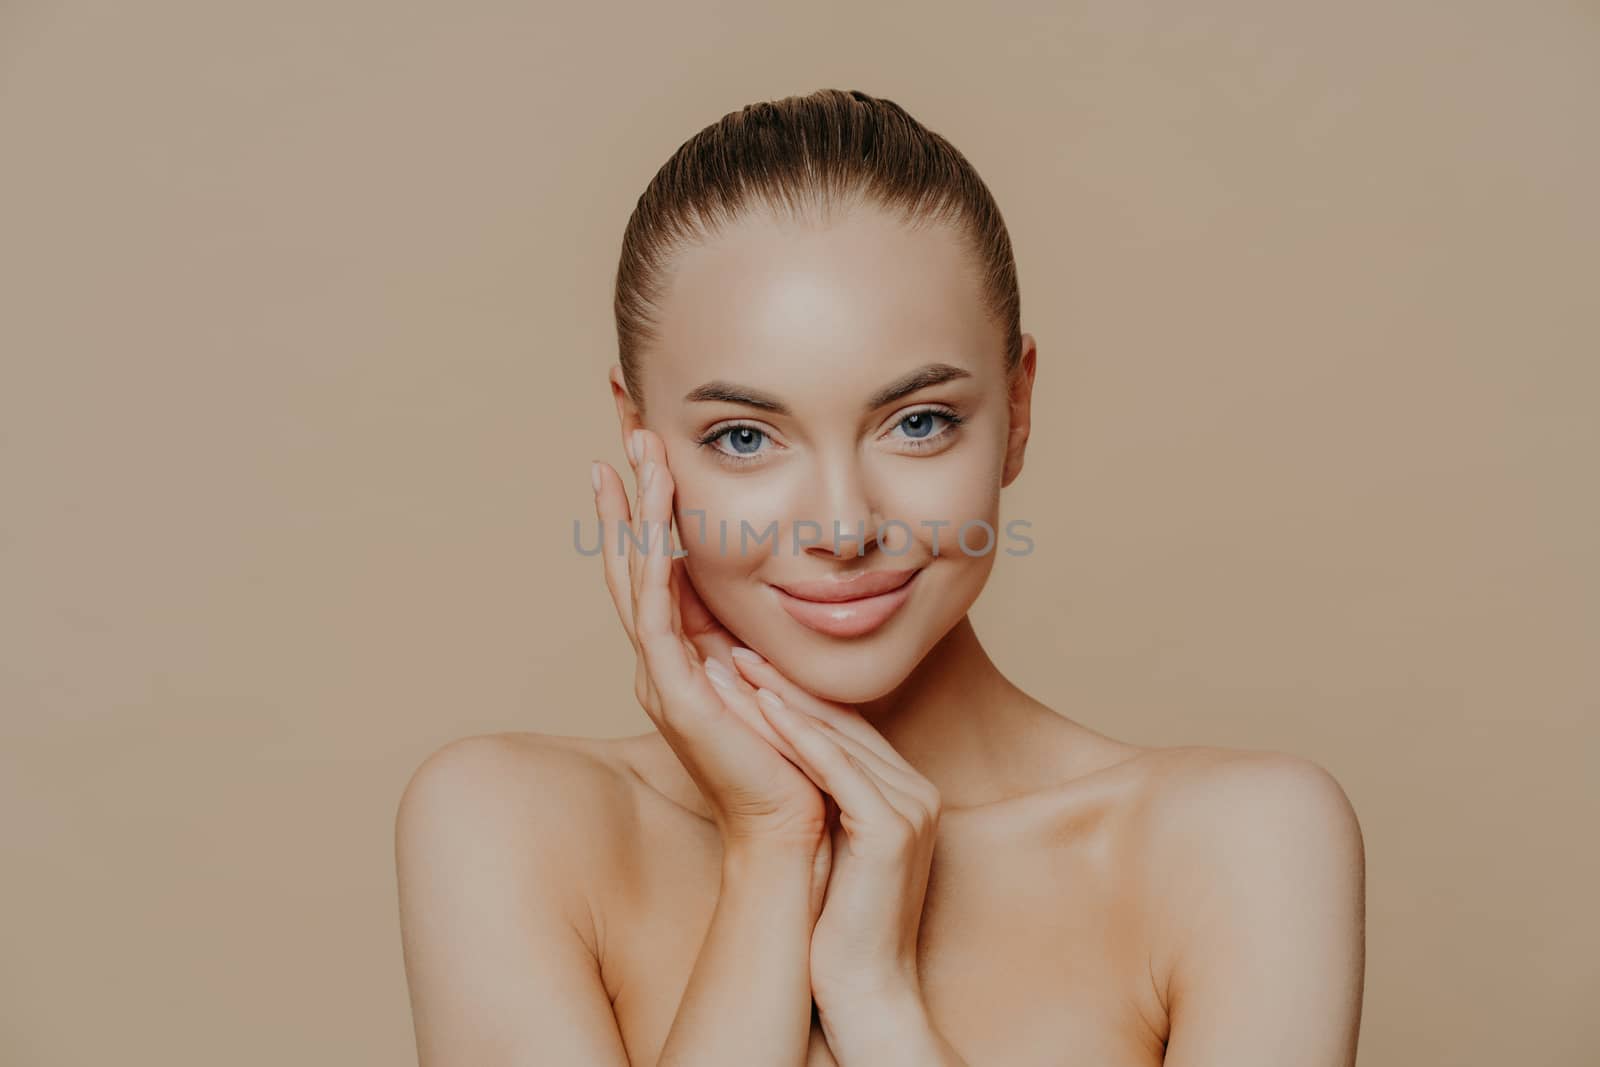 Natural beauty portrait. Photo of young woman enjoys perfect fresh skin after visiting cosmetologist, smiles gently, poses naked against beige background, touches face, wears minimal makeup.